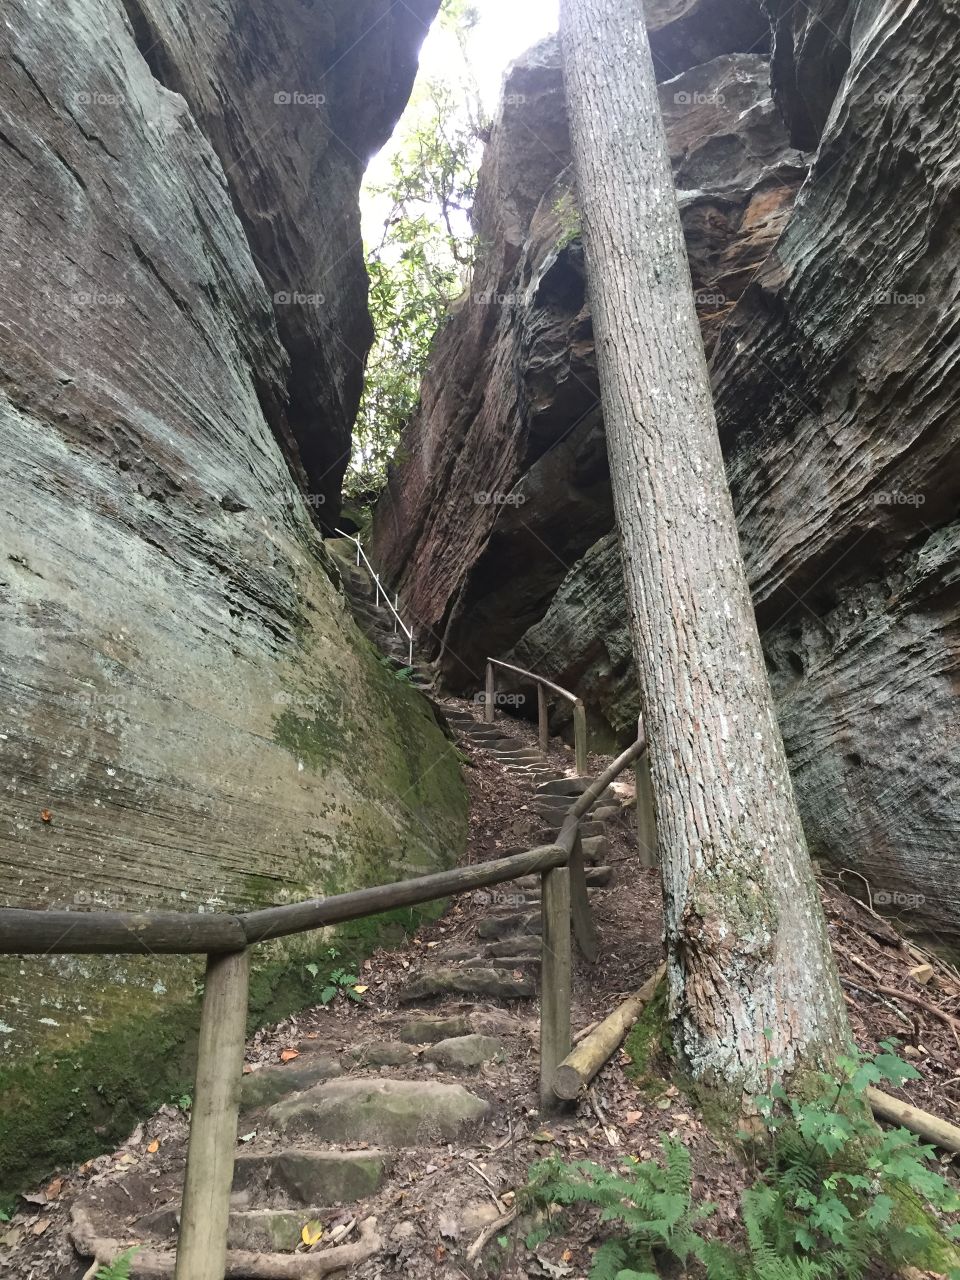 A flight of stairs carved into stone winding up between two rock faces. Fascinating geology in Kentucky's Natural Bridge State Park. This feature is called Devil's Gulch.